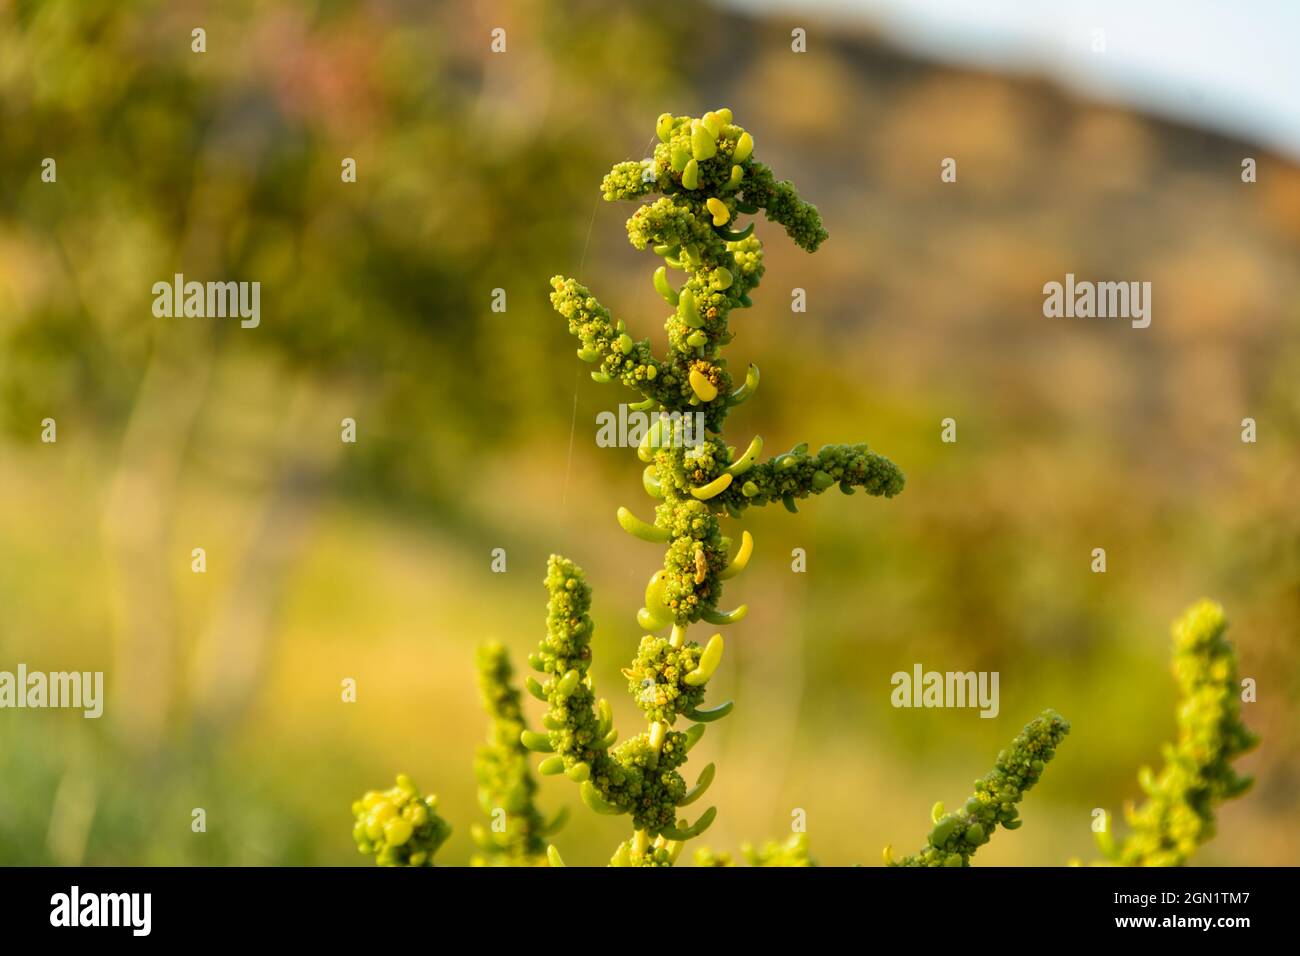 Dysphania ambrosioides , Mosyakin & Clemants with blur background Stock Photo